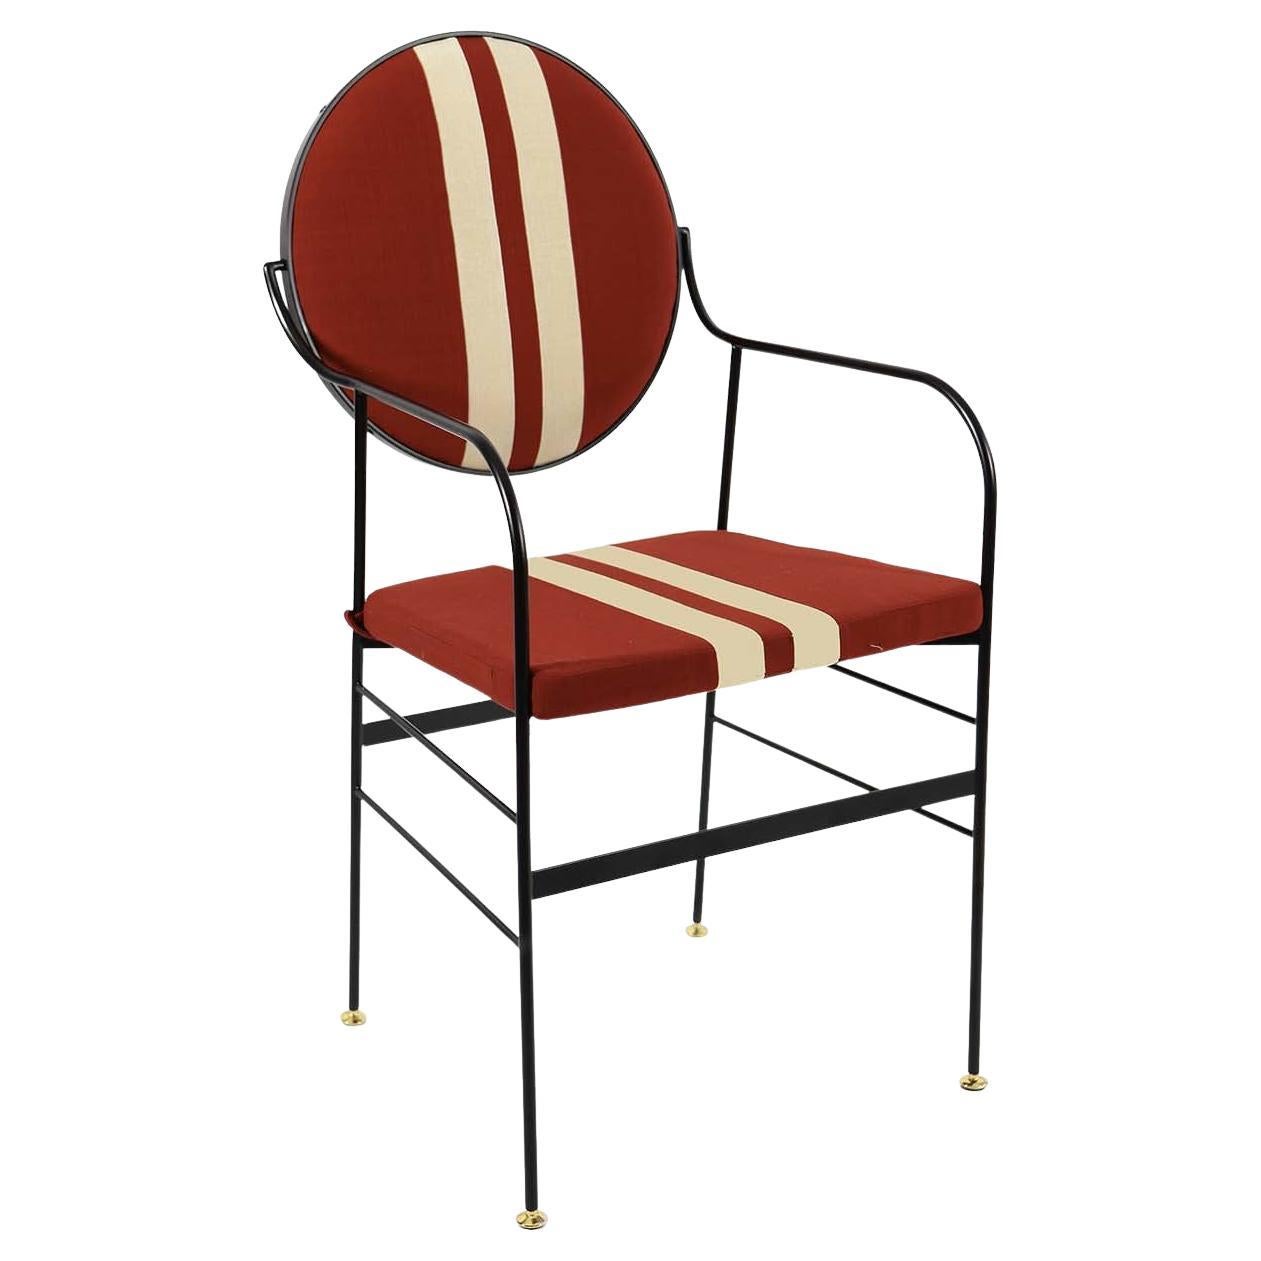 In Stock in Los Angeles, Luigina Red/White Sport Stripe Chair